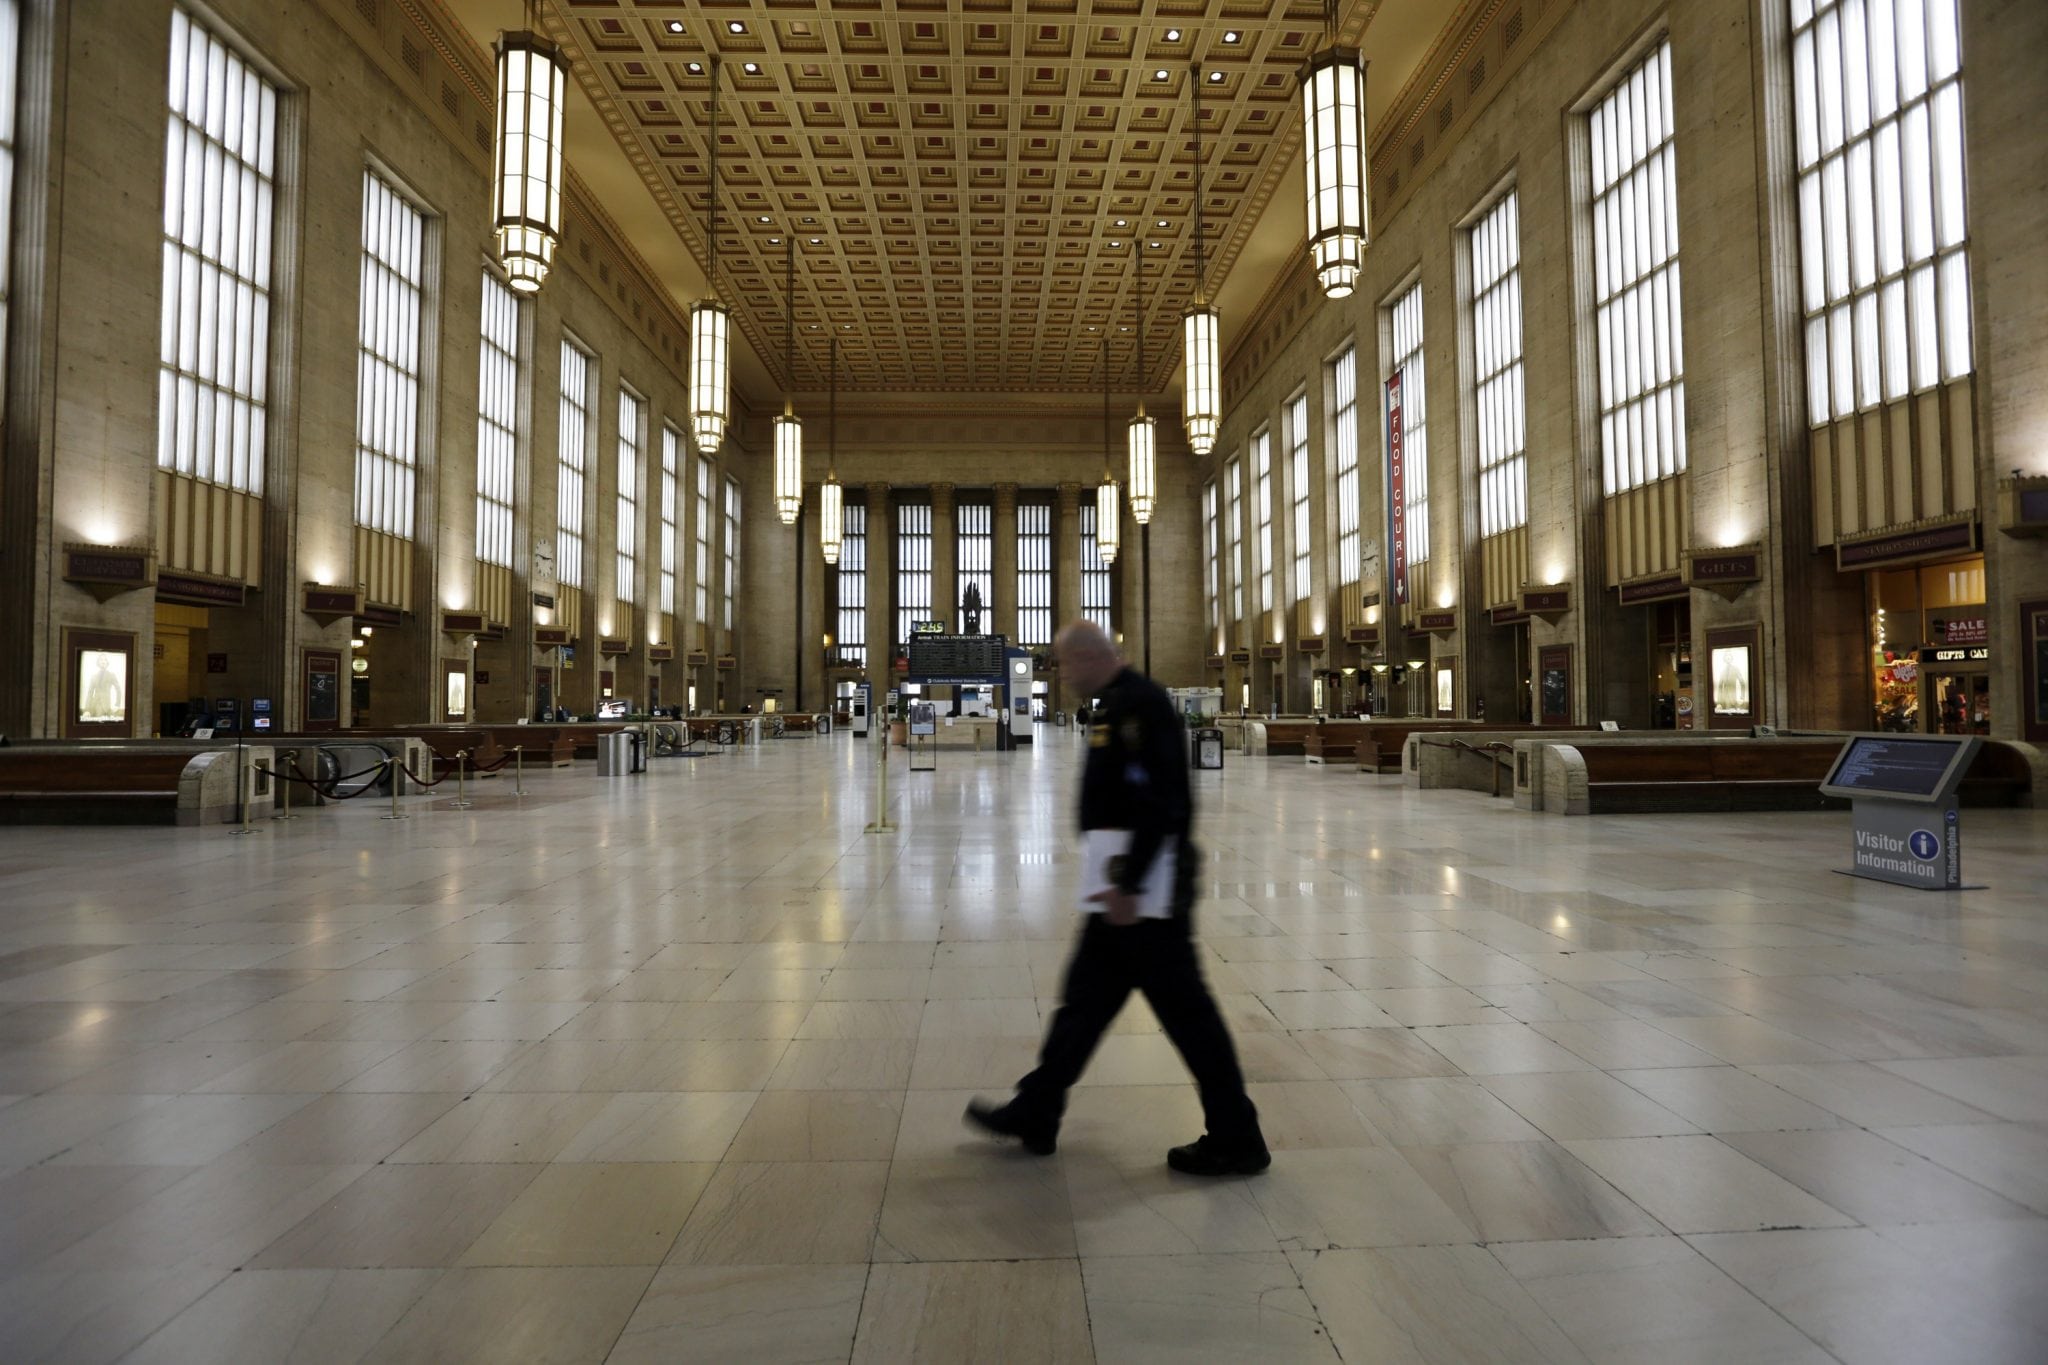 30th Street Station in Philadelphia serves Amtrak and regional rail in Pennsylvania, New Jersey, and Delaware. 